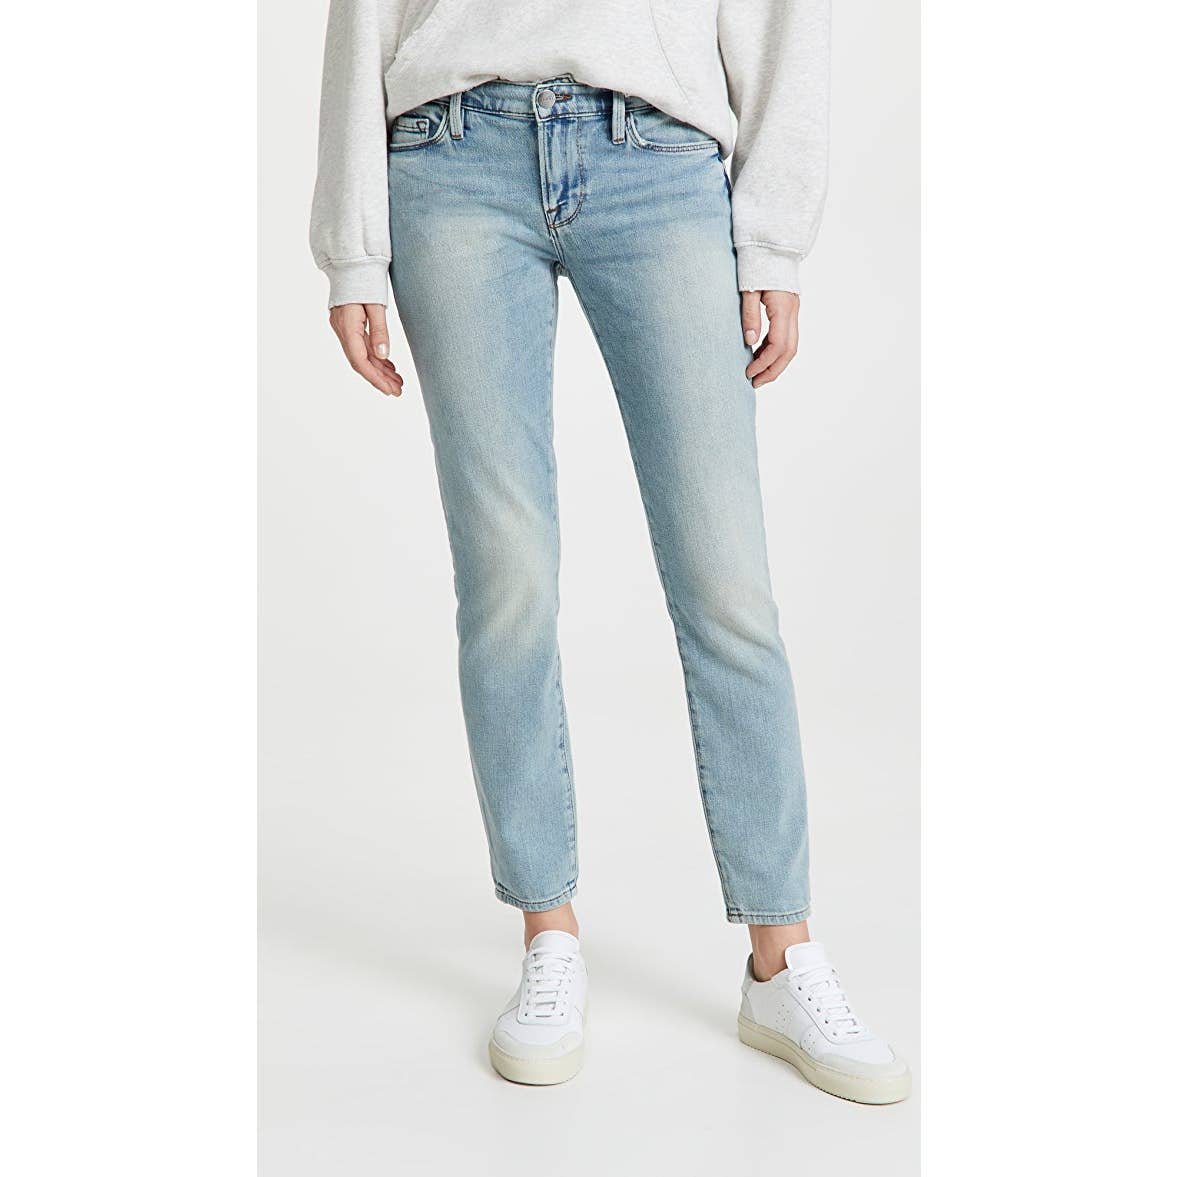 Promotions  FRAME Le Garcon Mid-Rise Boyfriend Ankle Jeans in Spotlight Light Wash NAjqVed04 well sale